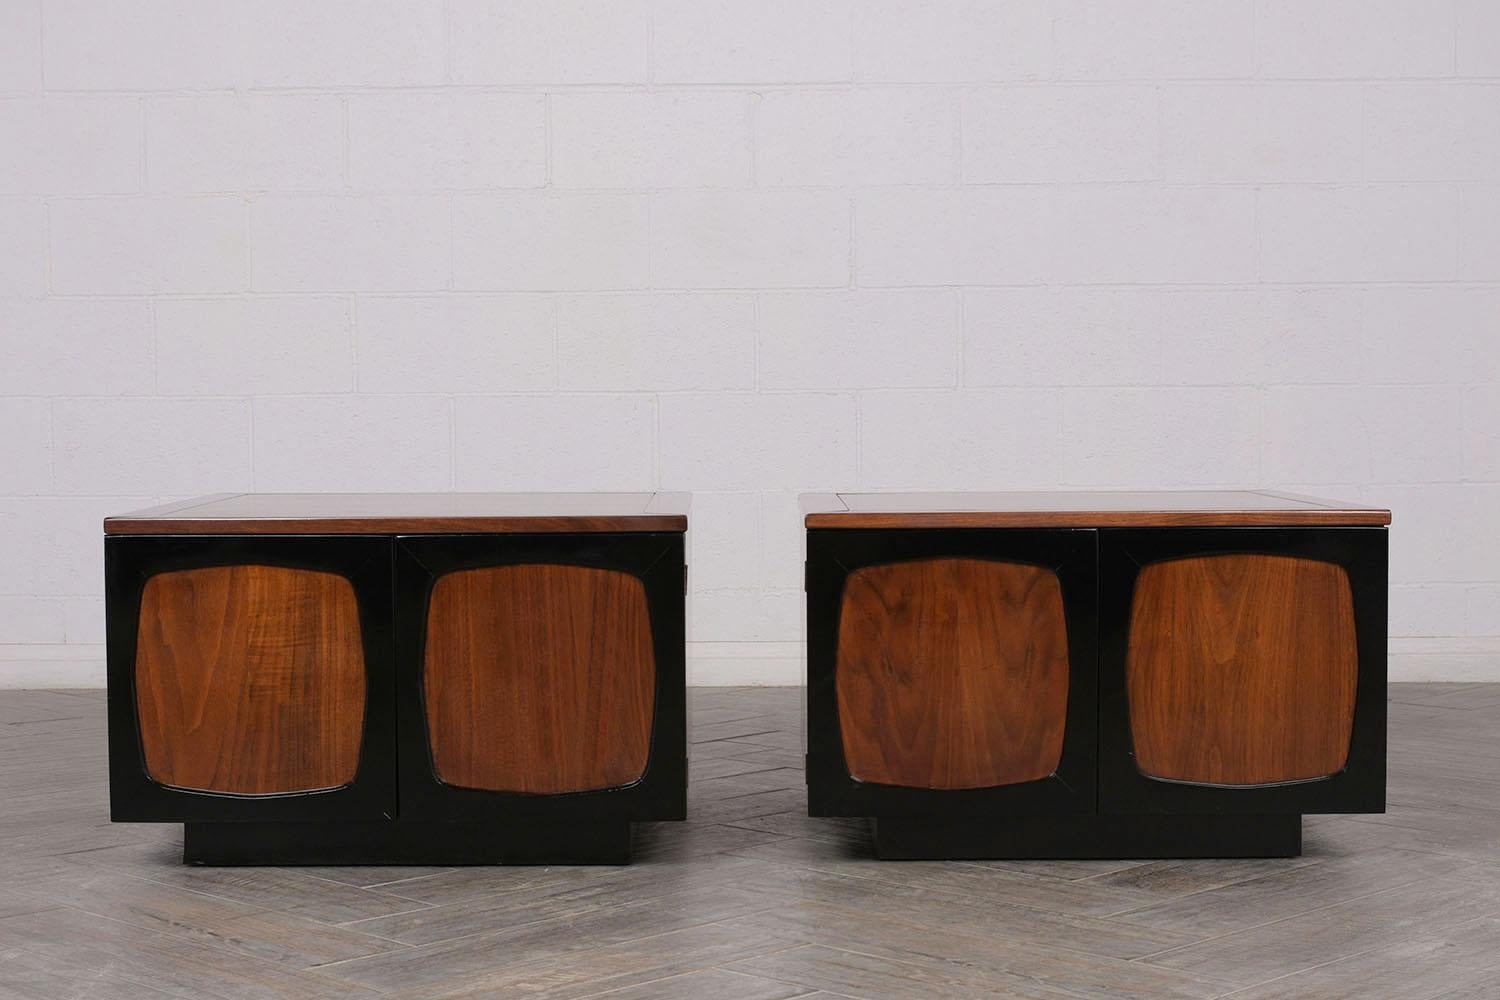 This Pair of 1970's Mid-Century Modern-style Cube Nightstands have been fully restored and have been newly stained in a walnut & black color combination with a lacquered finish. The pair of side tables feature carved wood details, two doors with